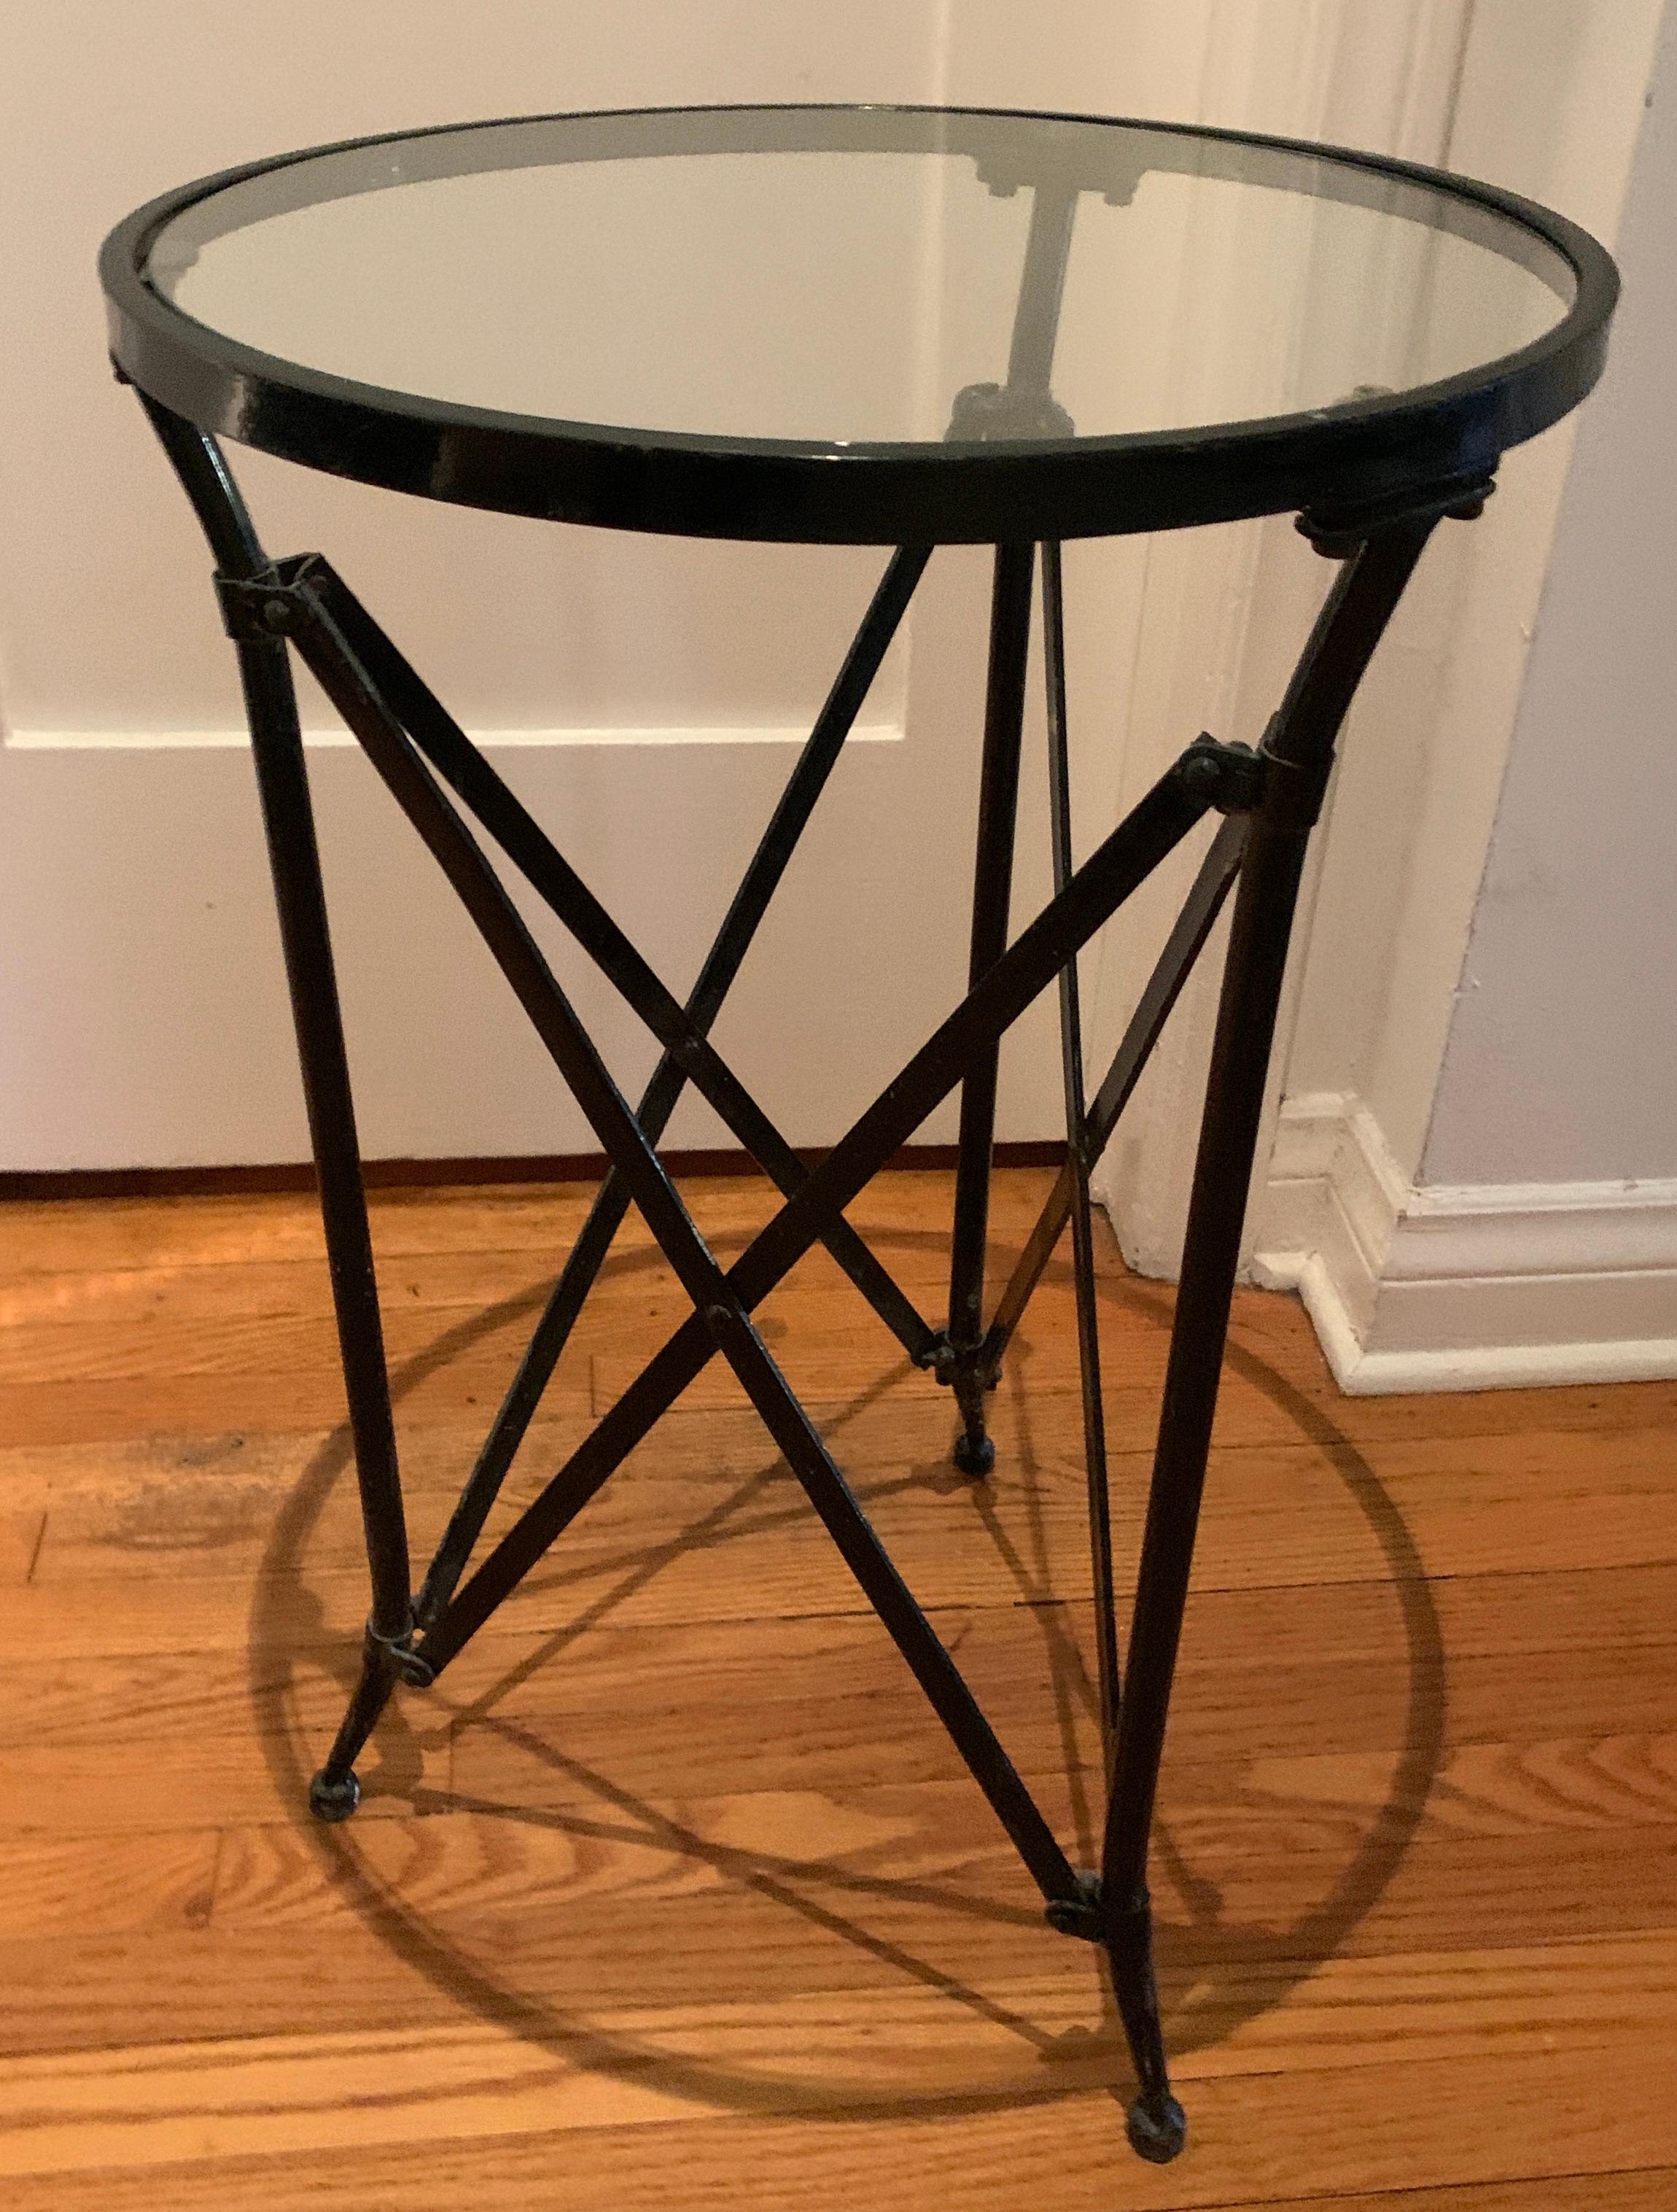 Metal frame table with adjustable slide metal legs.  While the legs look to adjust, they only appear to be manipulated, as the legs are more for the look... a well-made and nice side table.  

A nice side table to pull up or great for a guest room,